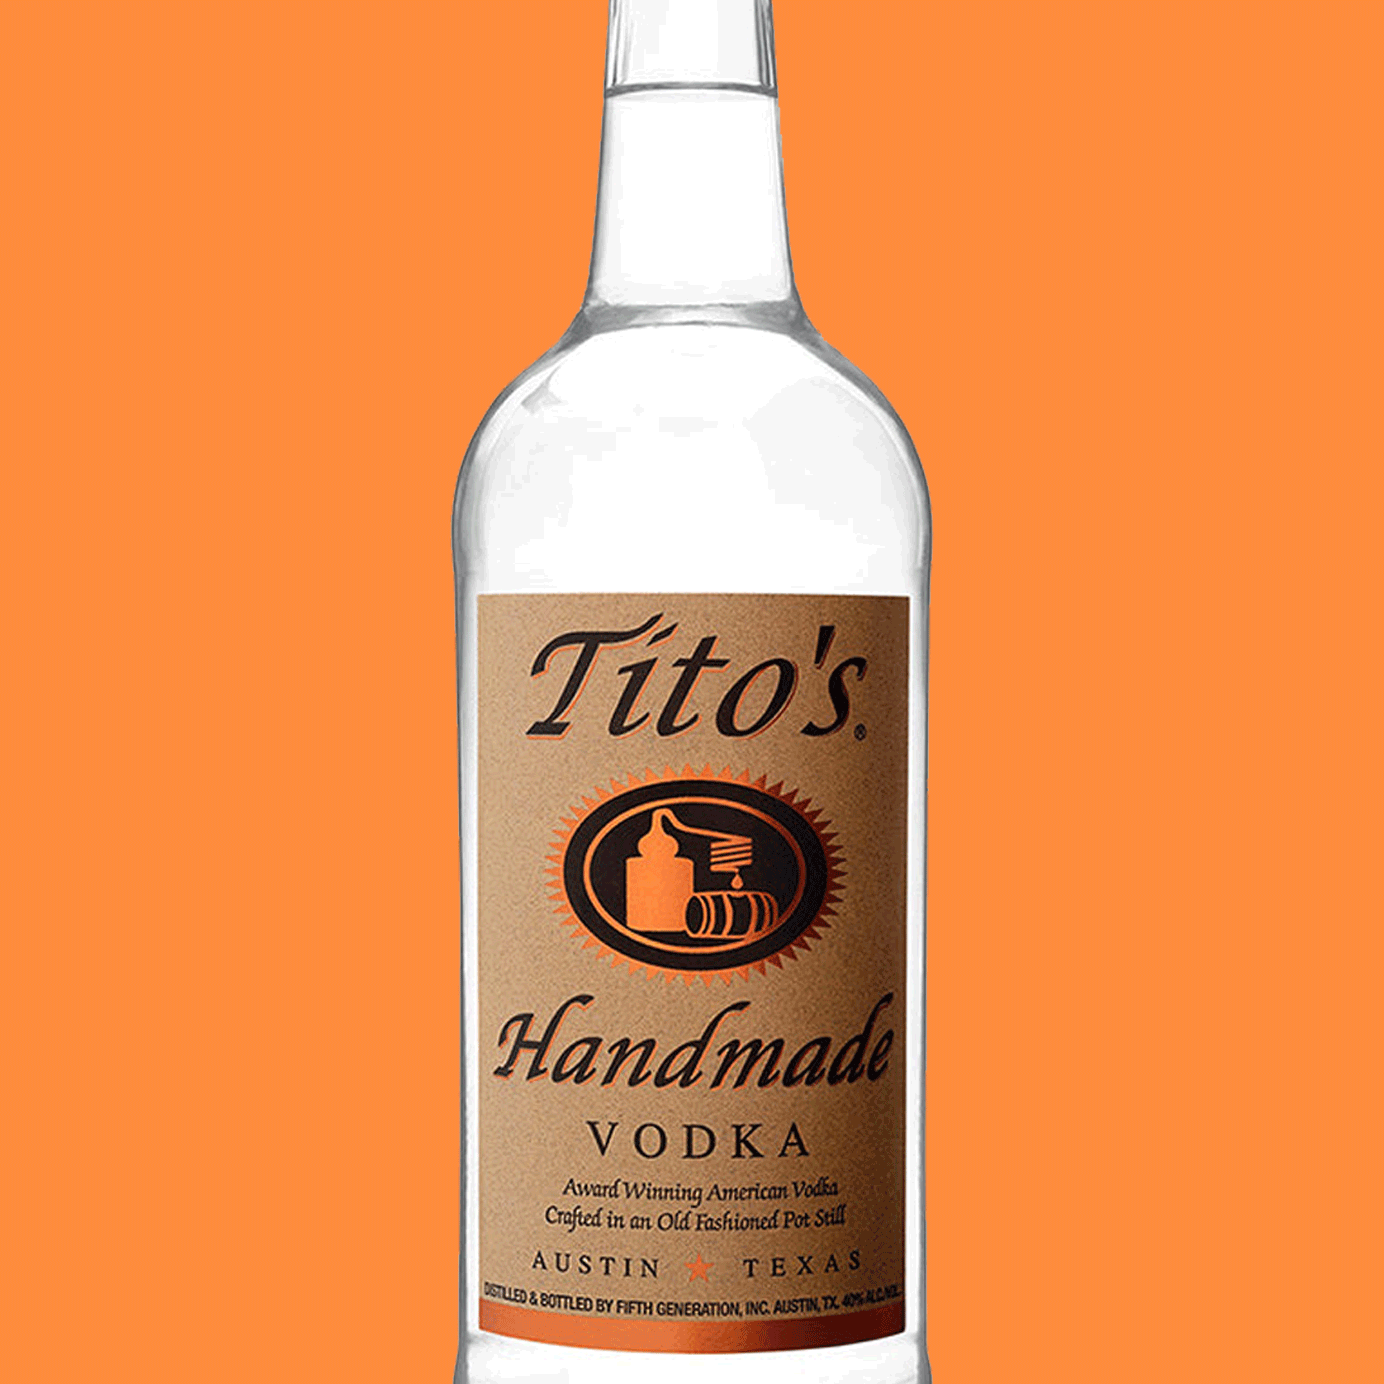 Some Things Never Change: How Tito’s Continues to Dominate by Being Unabashedly Itself